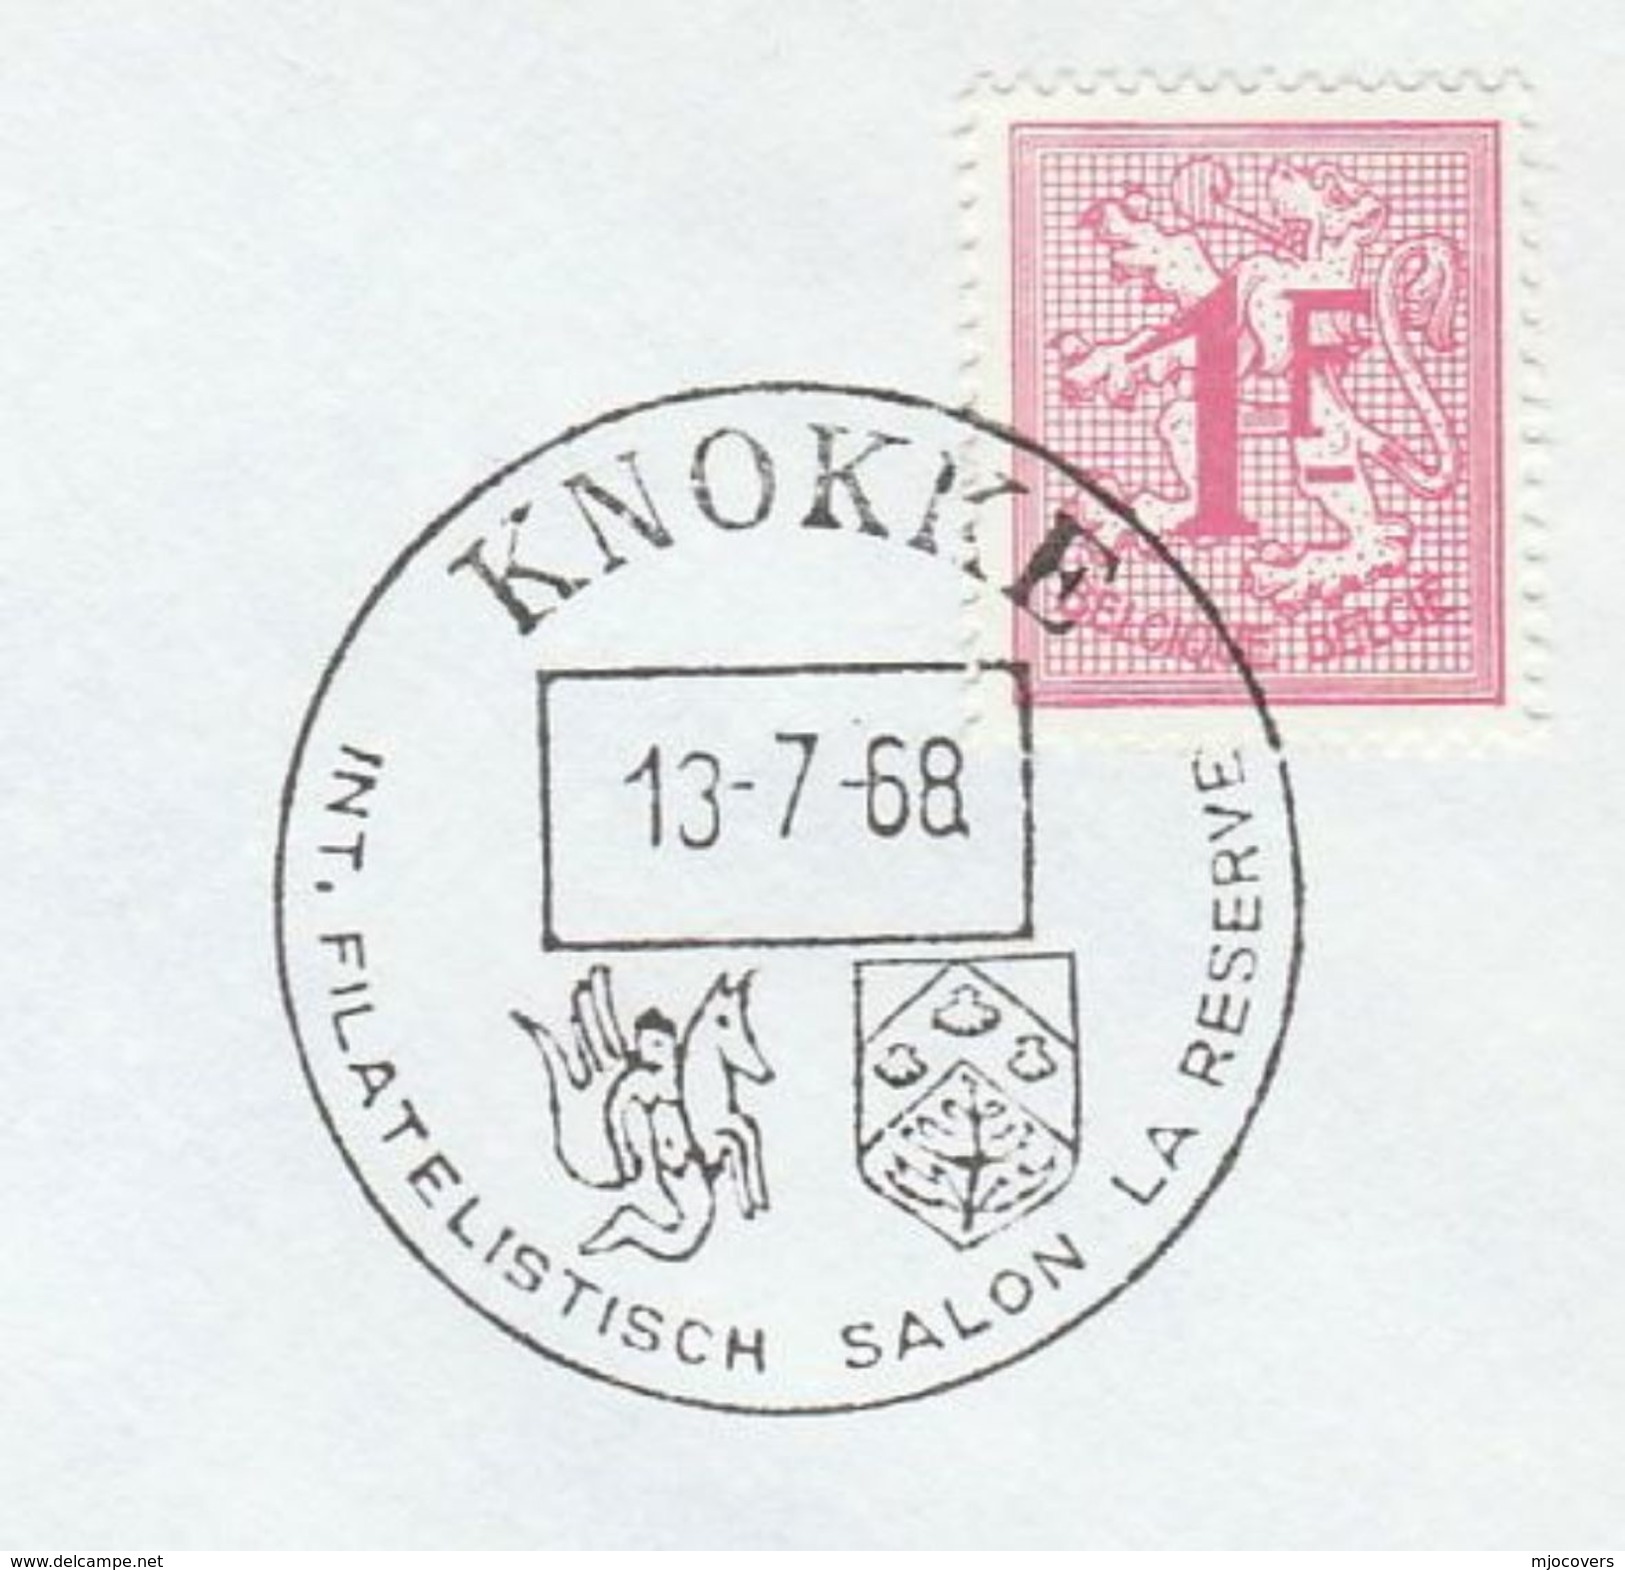 1968 Knokke MERMAID ?  EVENT COVER Coat Of Arms Philatelic Exhibition, Stamps - Mythologie